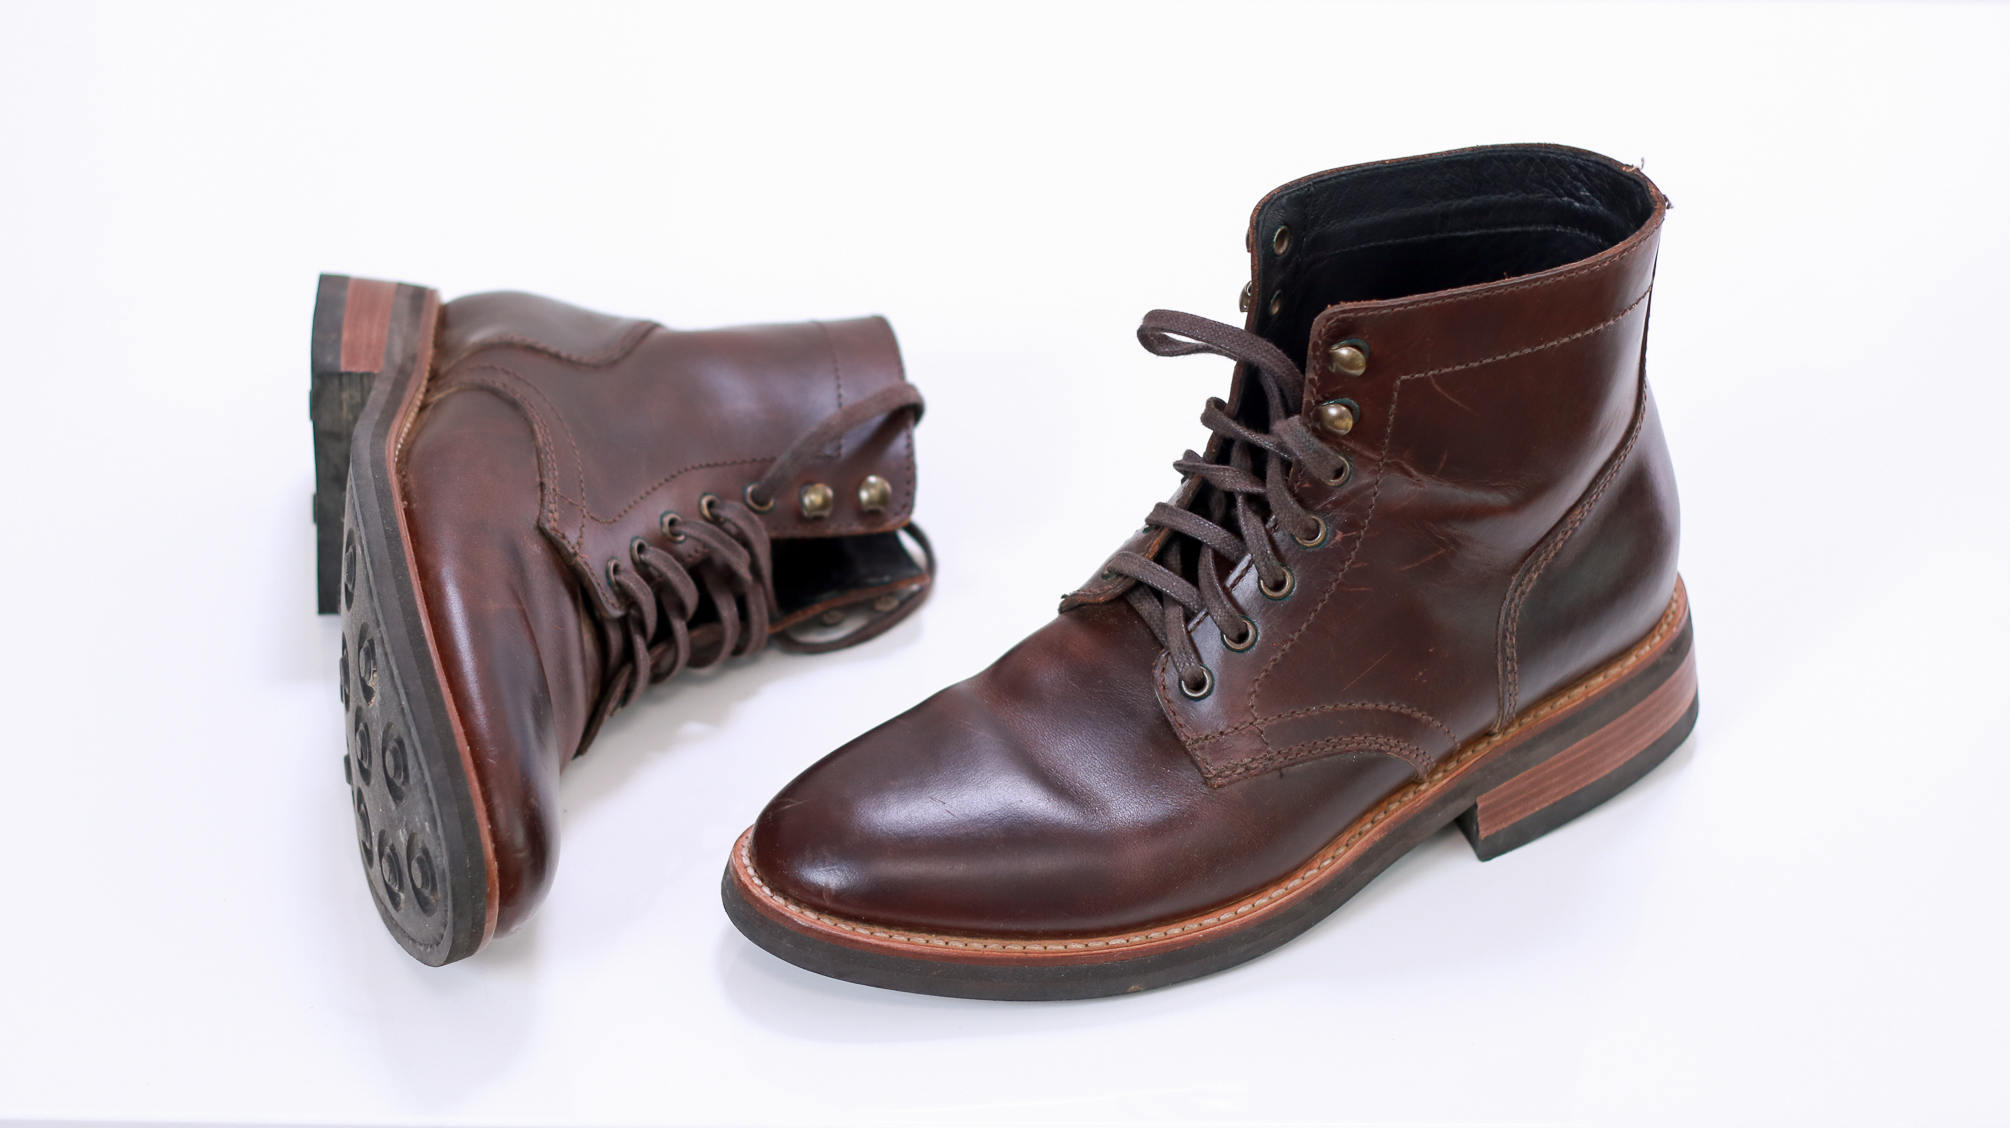 10 Best Types of Boots for Men (and My 